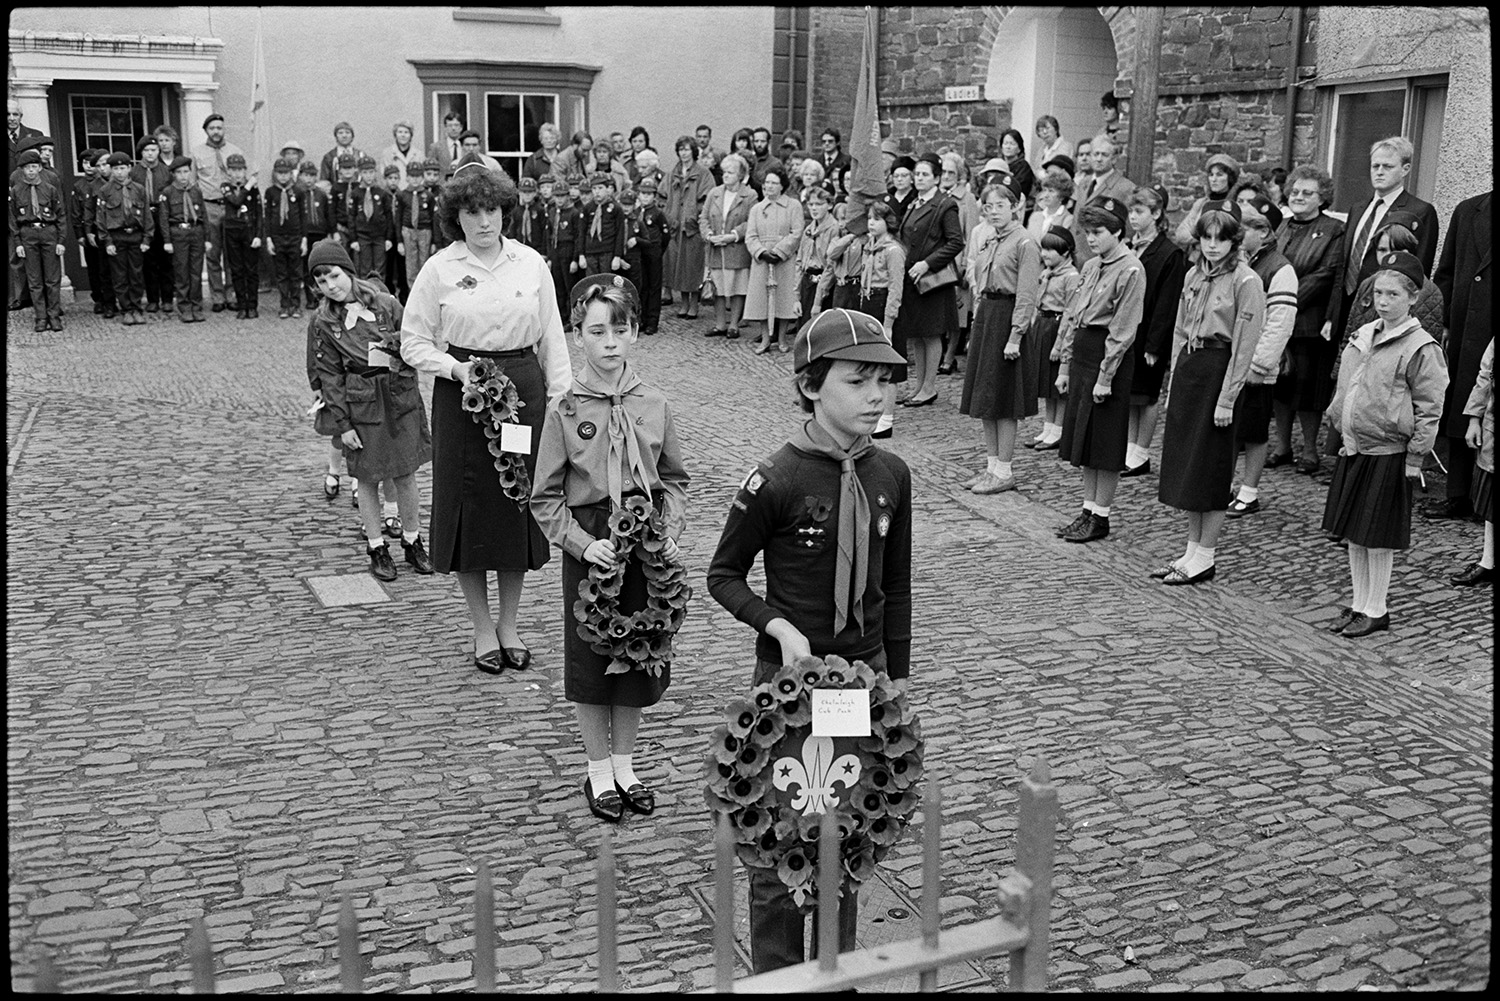 Parade at Memorial, laying wreaths by men, women and scouts. Vicar saying prayers.
[People assembling for the Remembrance Sunday wreath laying ceremony at the war memorial in the cobbled square at Chulmleigh. There are groups of Girl Guides and Scouts. One Scout, a Girl Guide, a Guide leader and a Brownie are carrying wreaths to the memorial.]